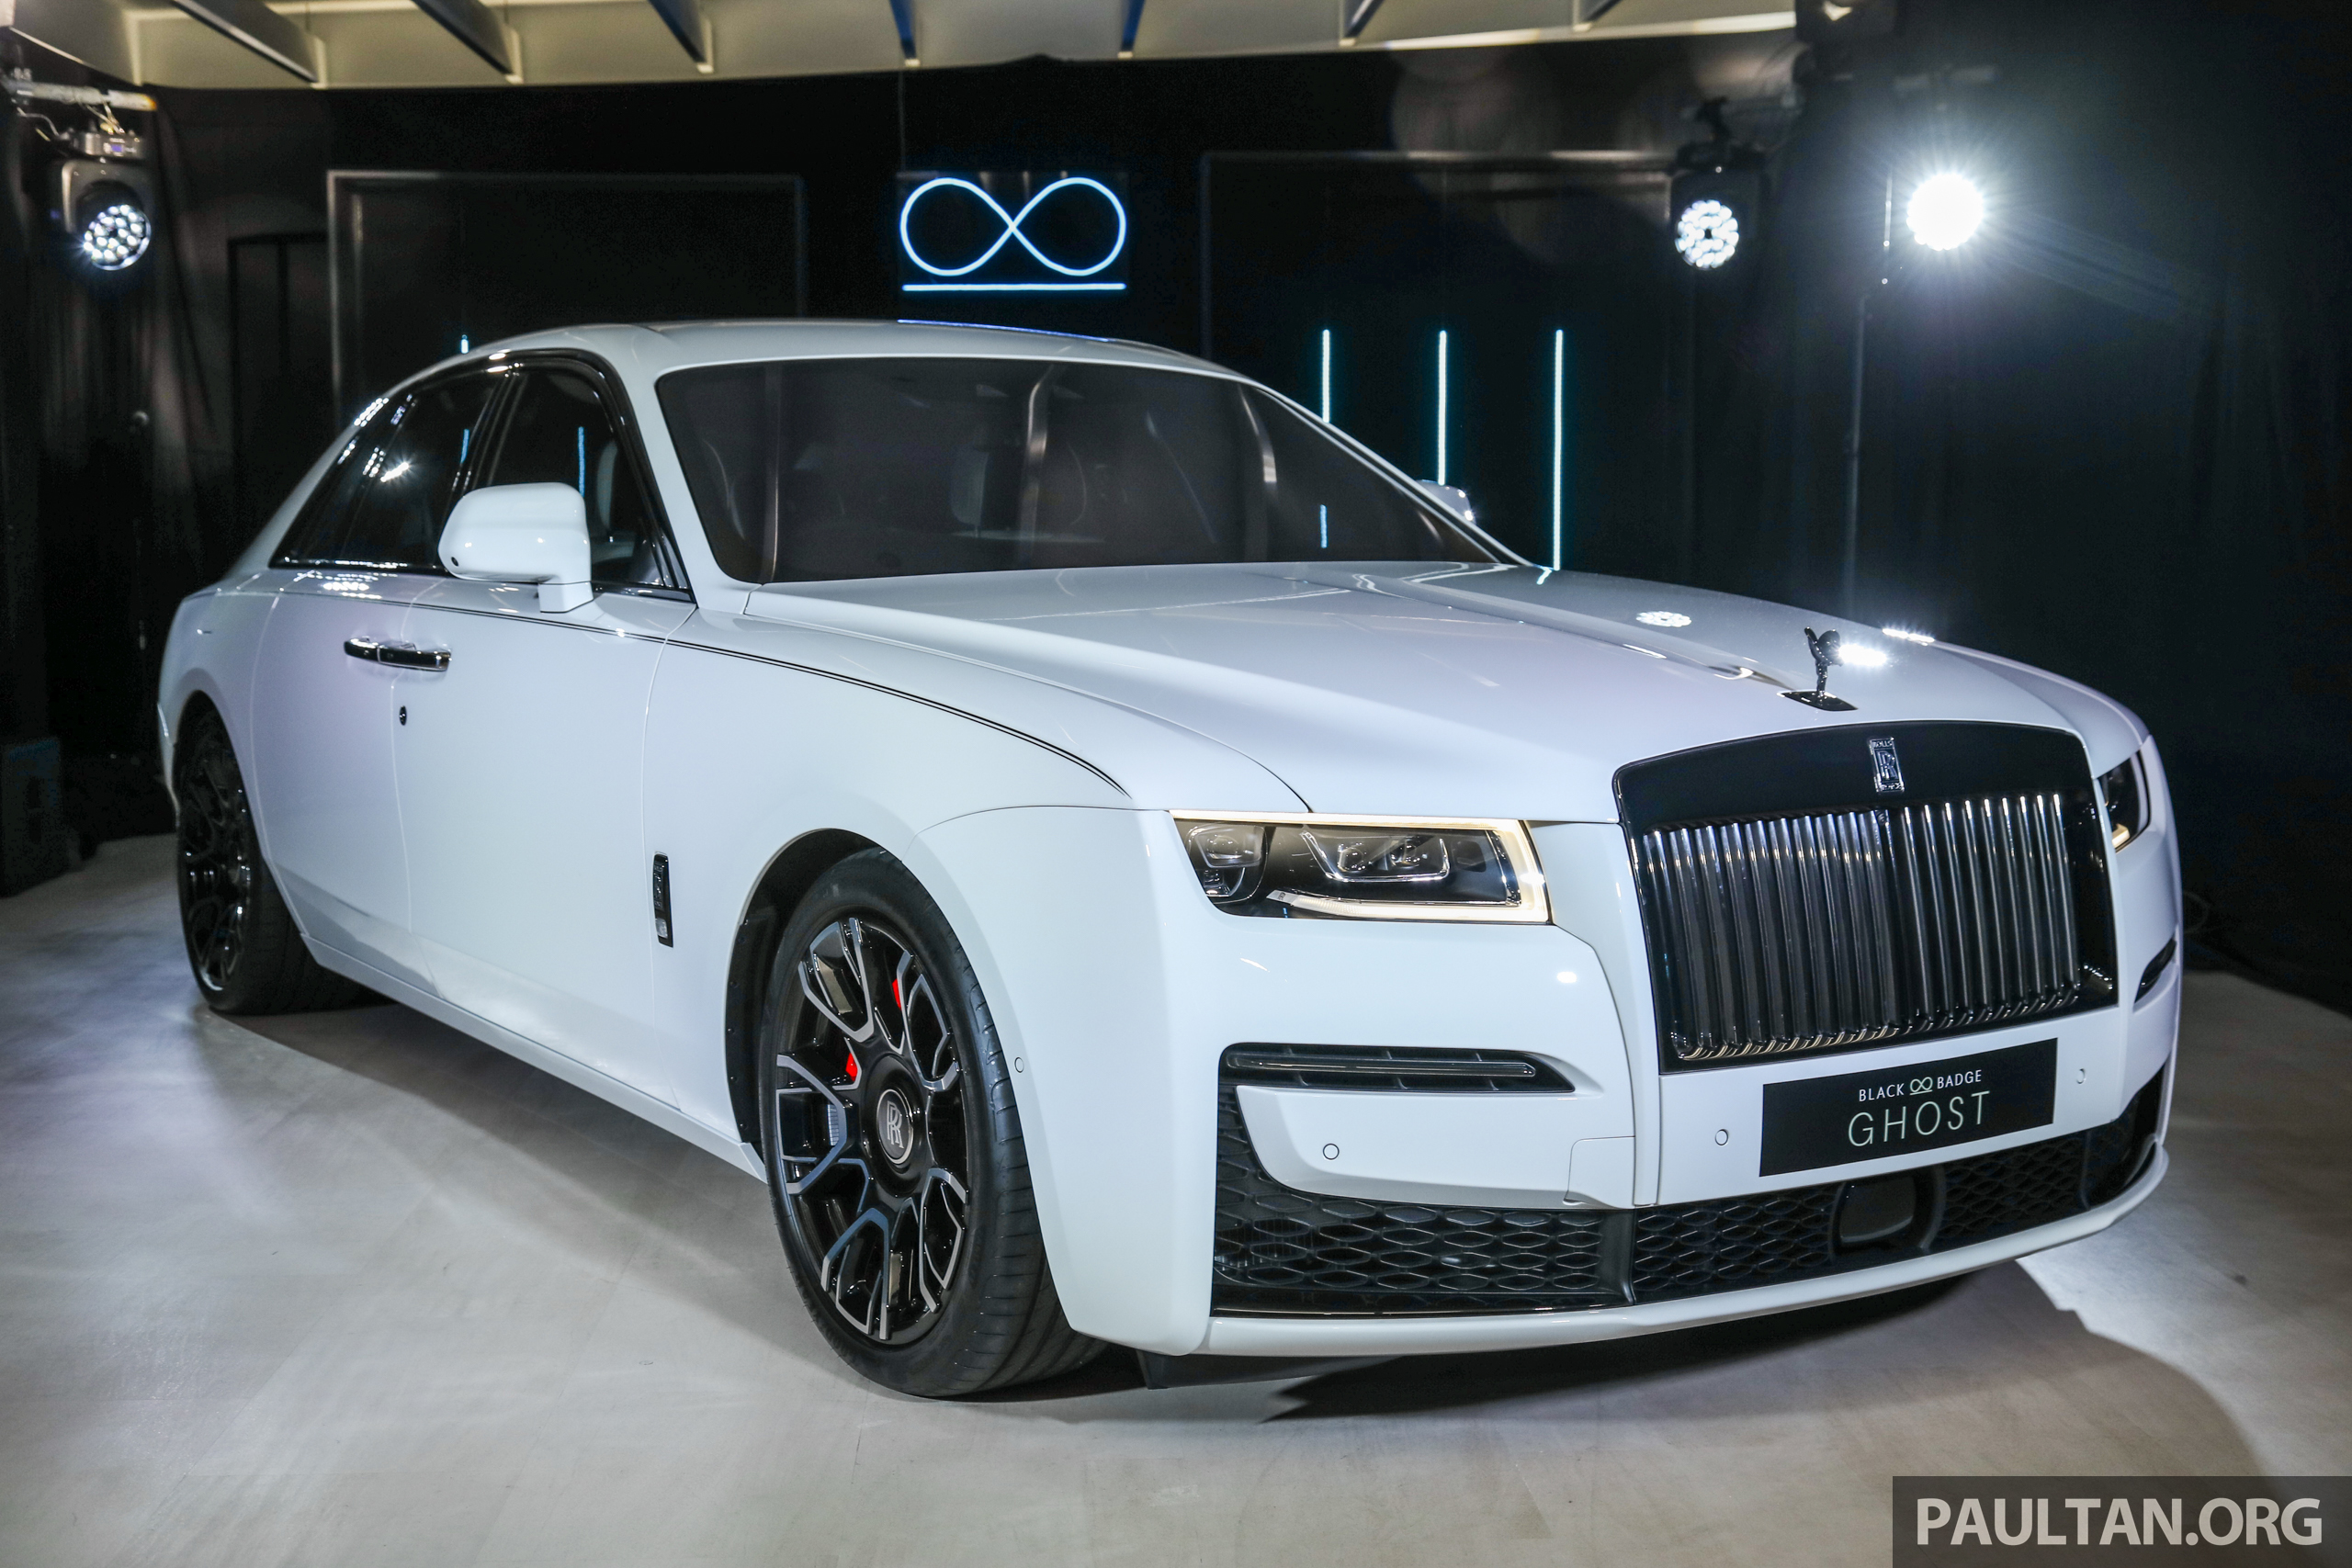 Why Youll Never See a Hybrid SelfDriving RollsRoyce